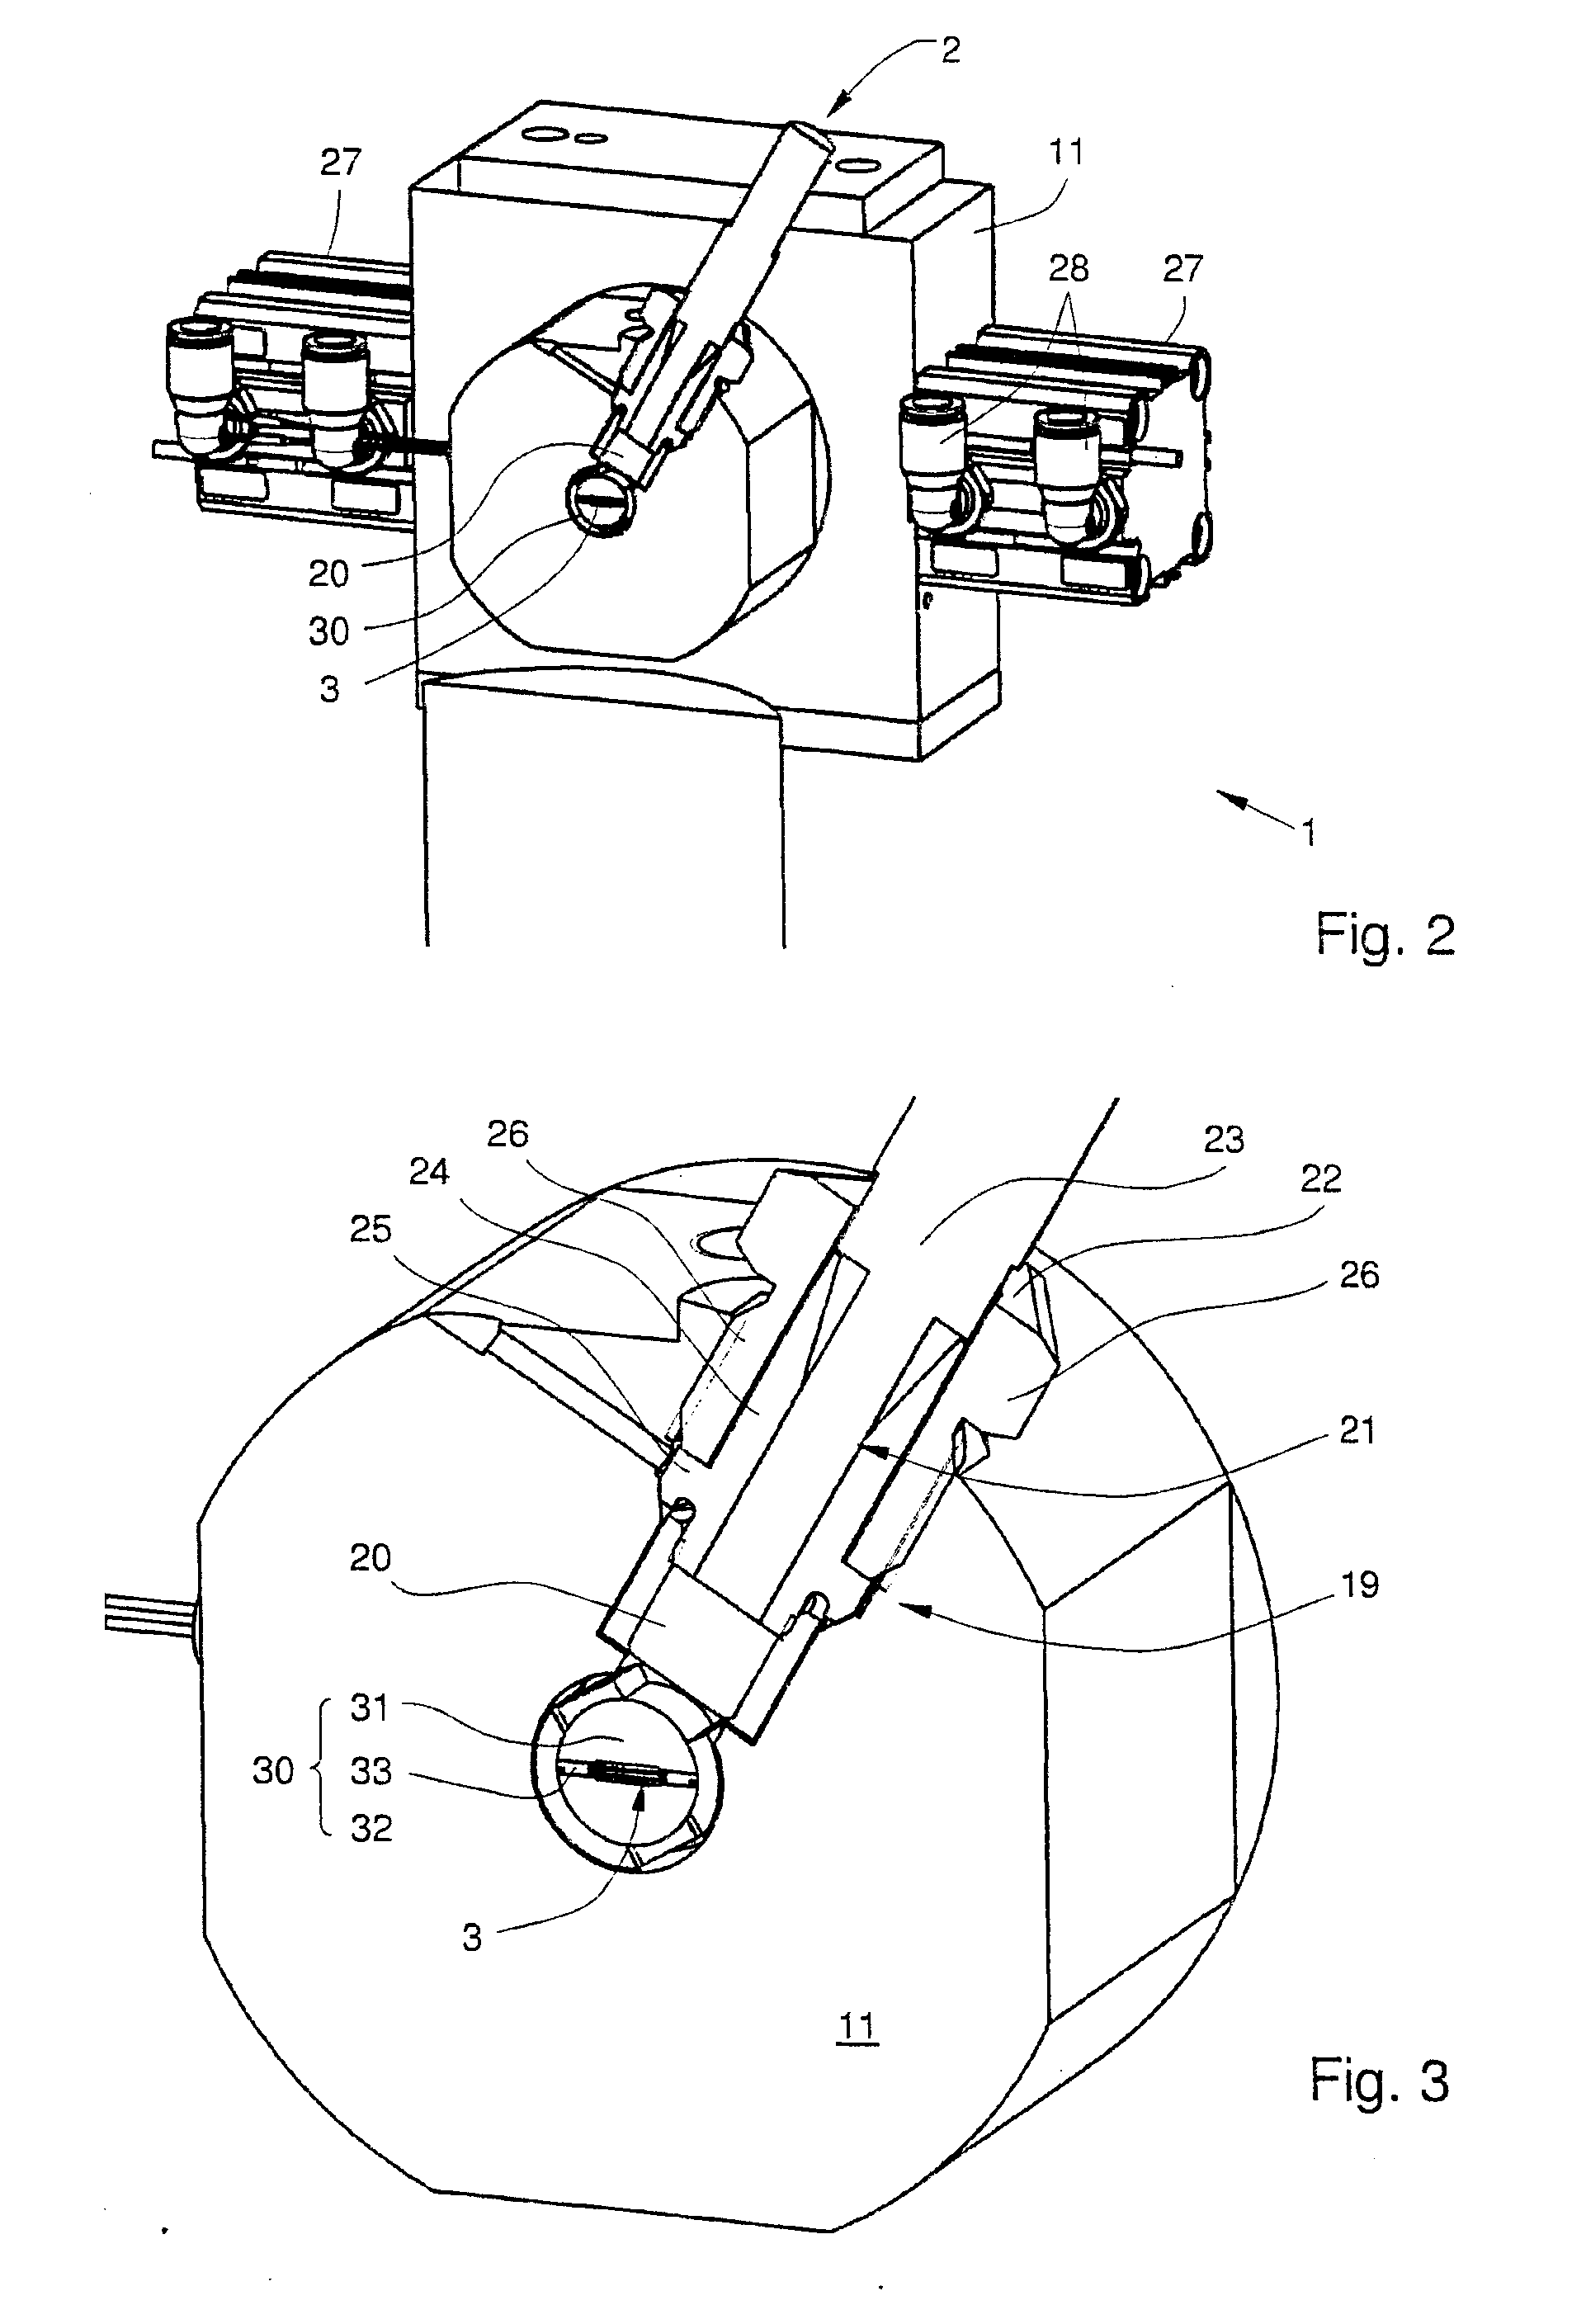 Device for the light stimulation and cryopreservation of biological samples